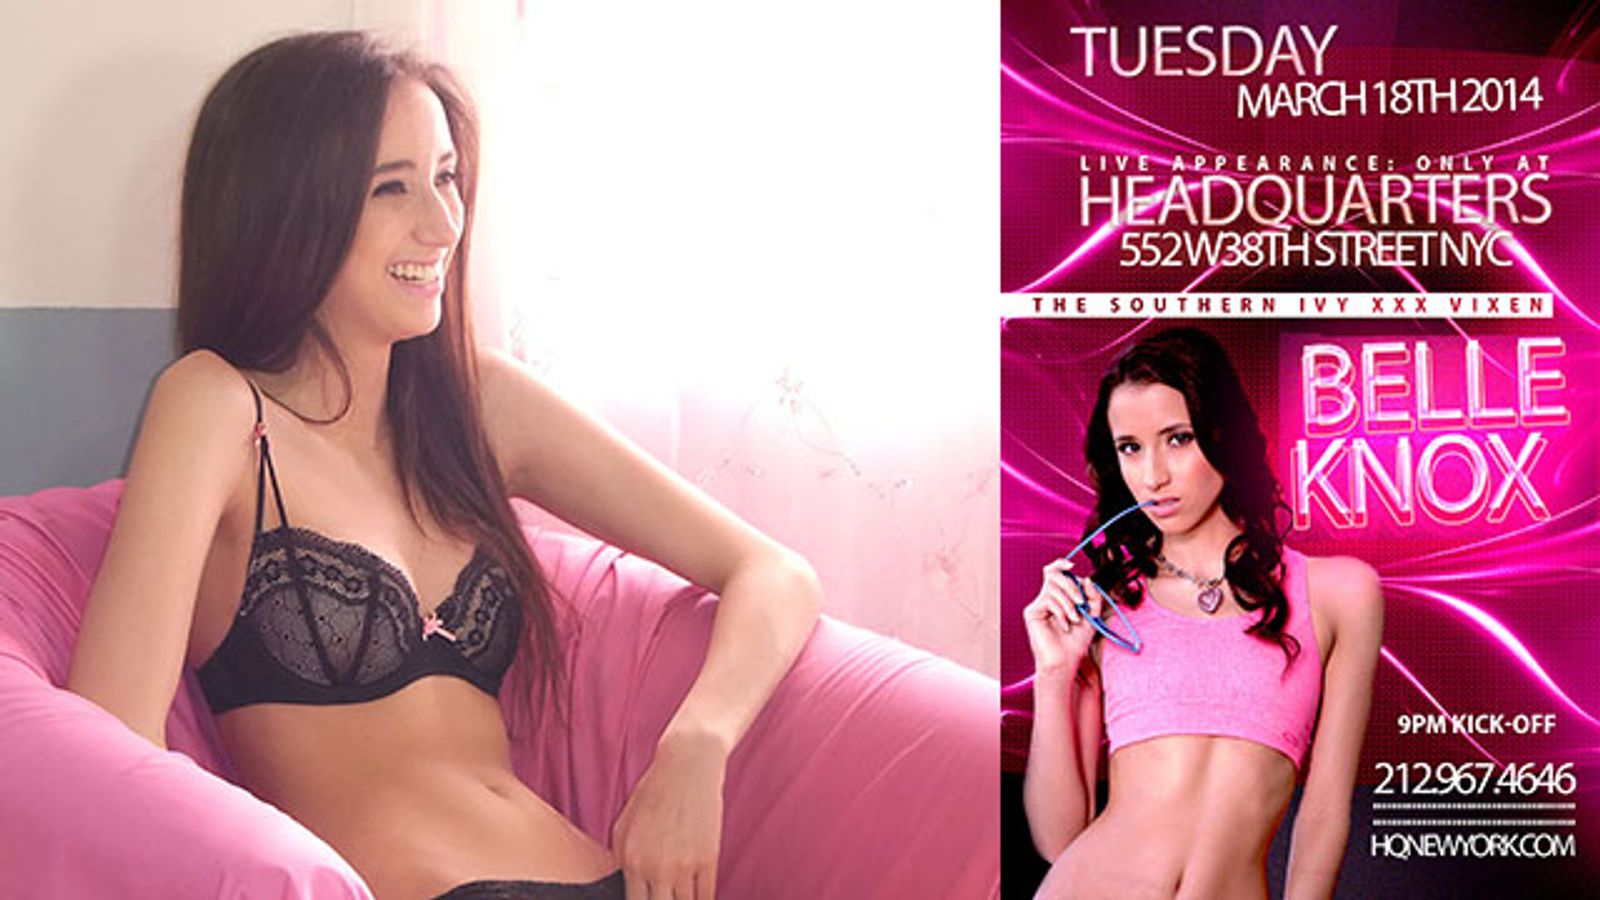 Belle Knox on NYC Media Tour March 17-20